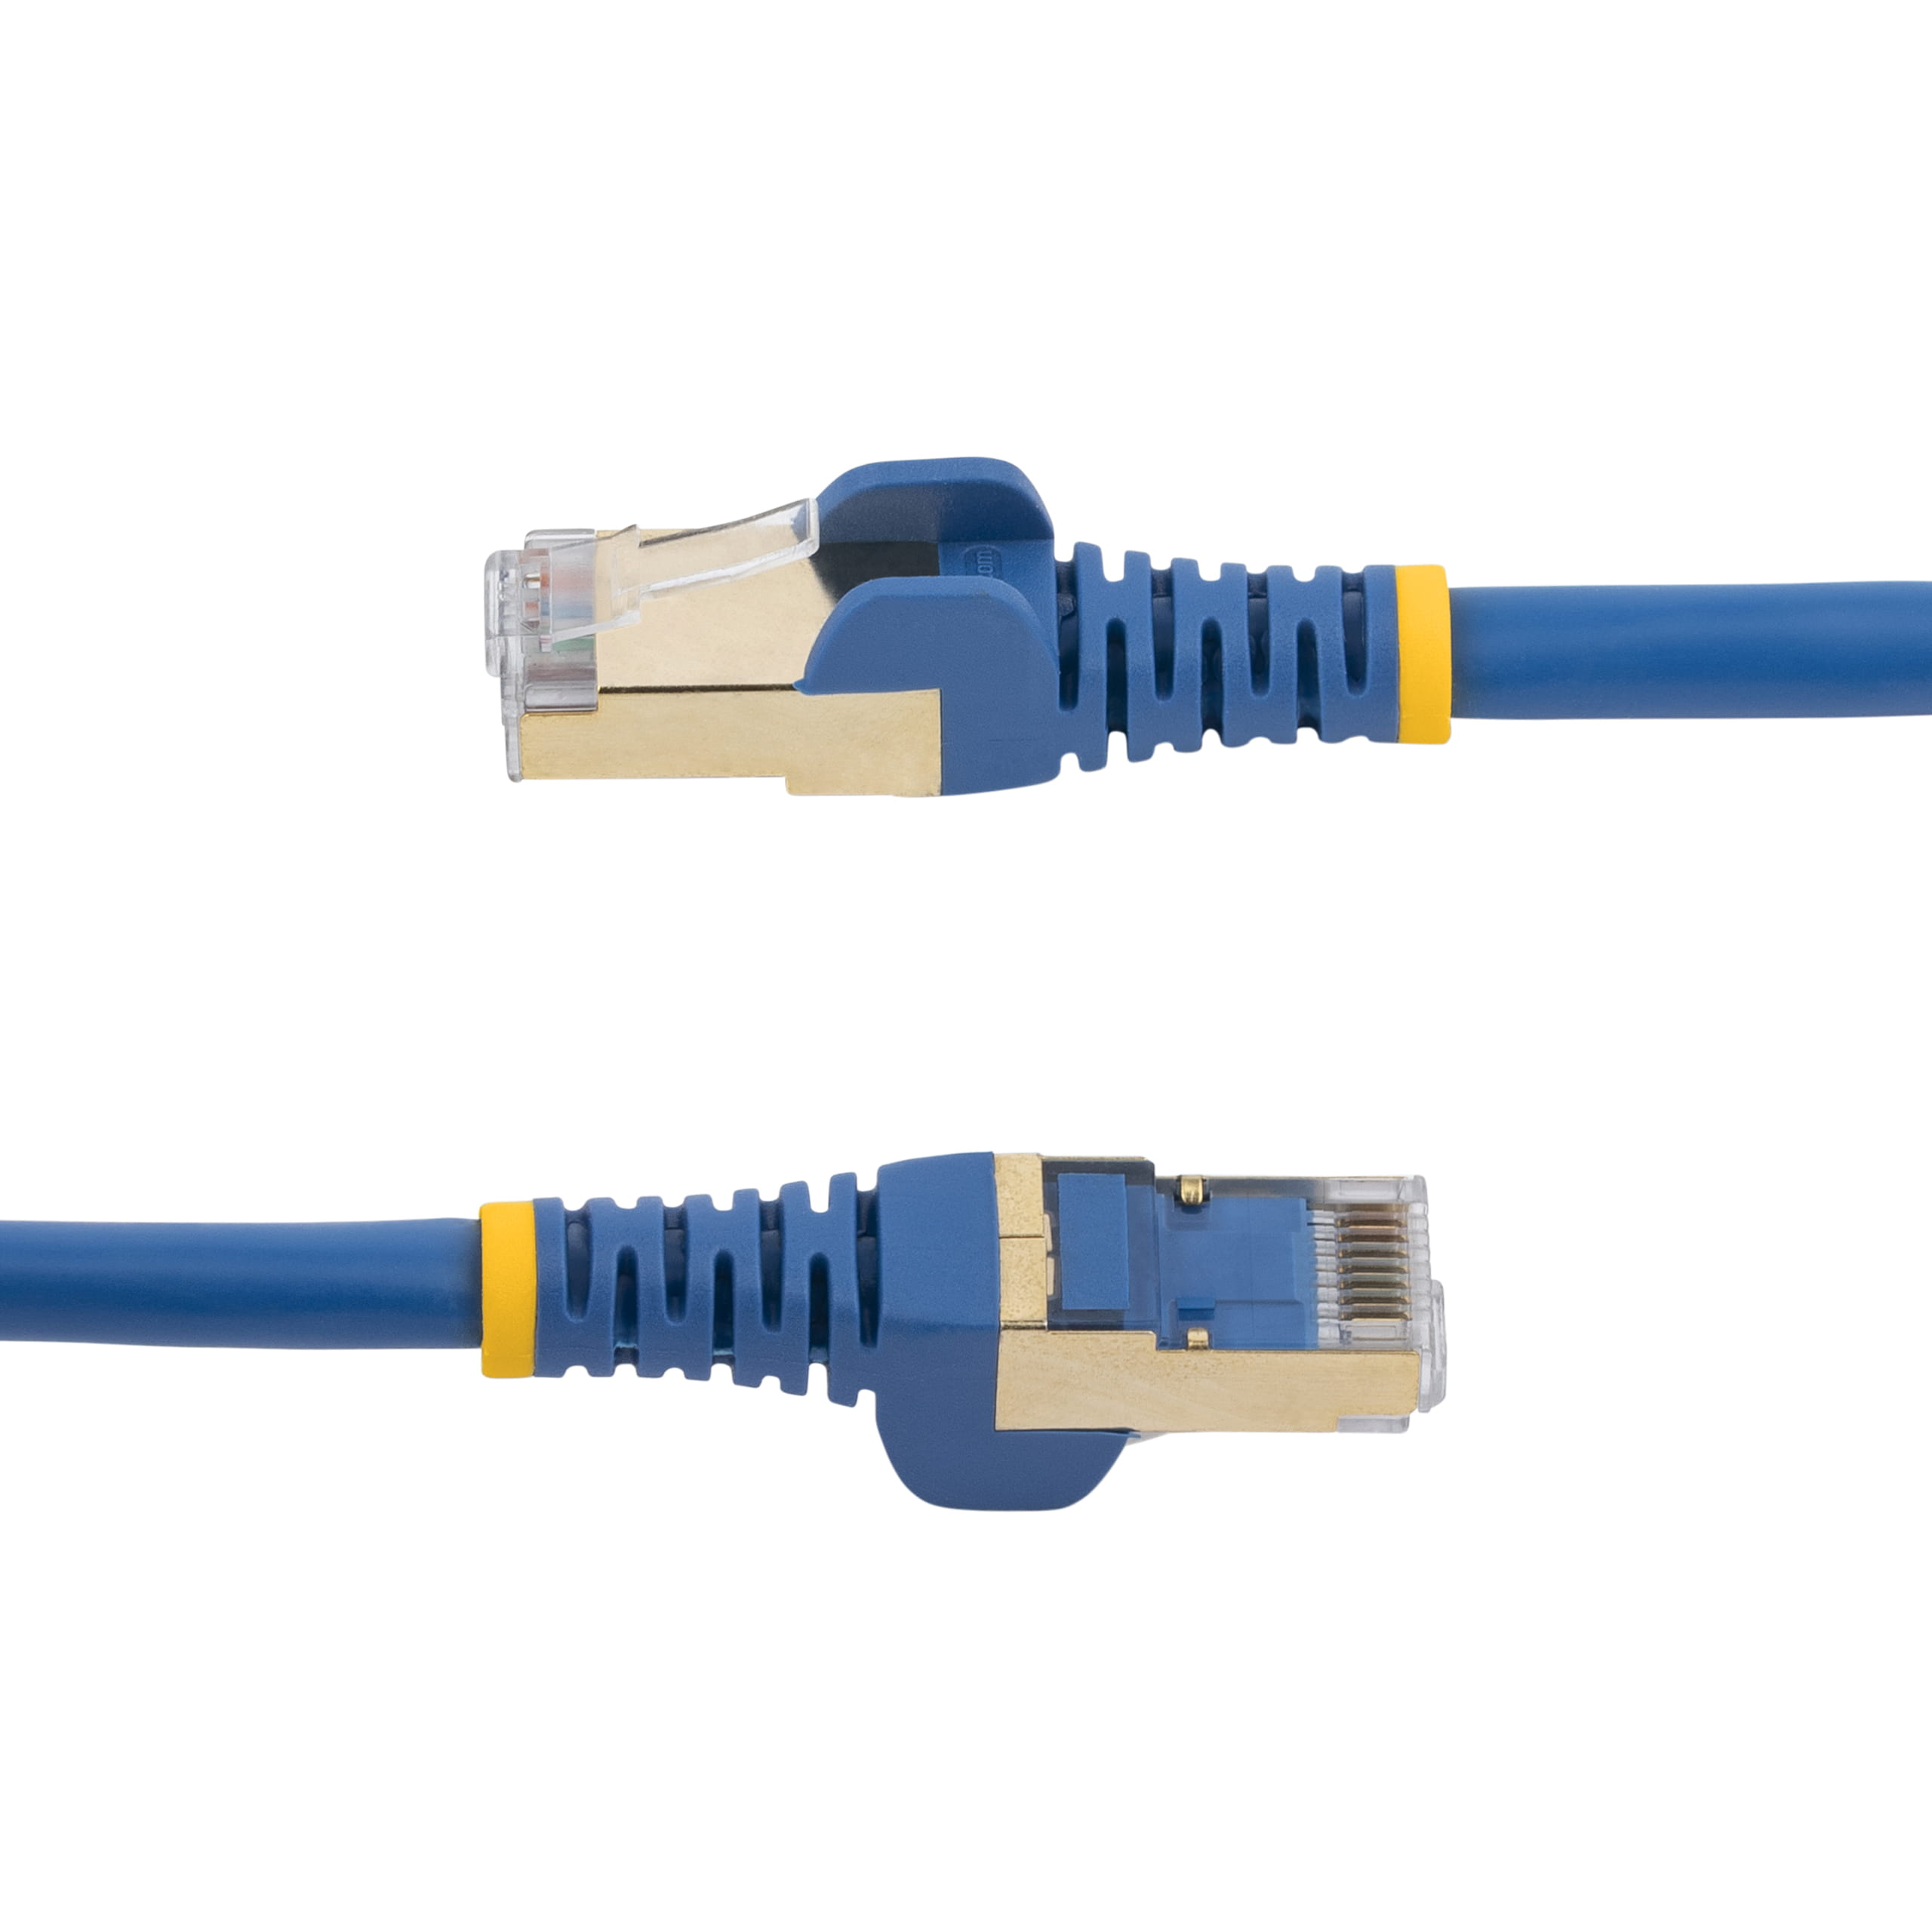 StarTech.com 3m CAT6A Ethernet Cable, 10 Gigabit Shielded Snagless RJ45 100W PoE Patch Cord, CAT 6A 10GbE STP Network Cable w/Strain Relief, Blue, Fluke Tested/UL Certified Wiring/TIA - Category 6A - 26AWG (6ASPAT3MBL)